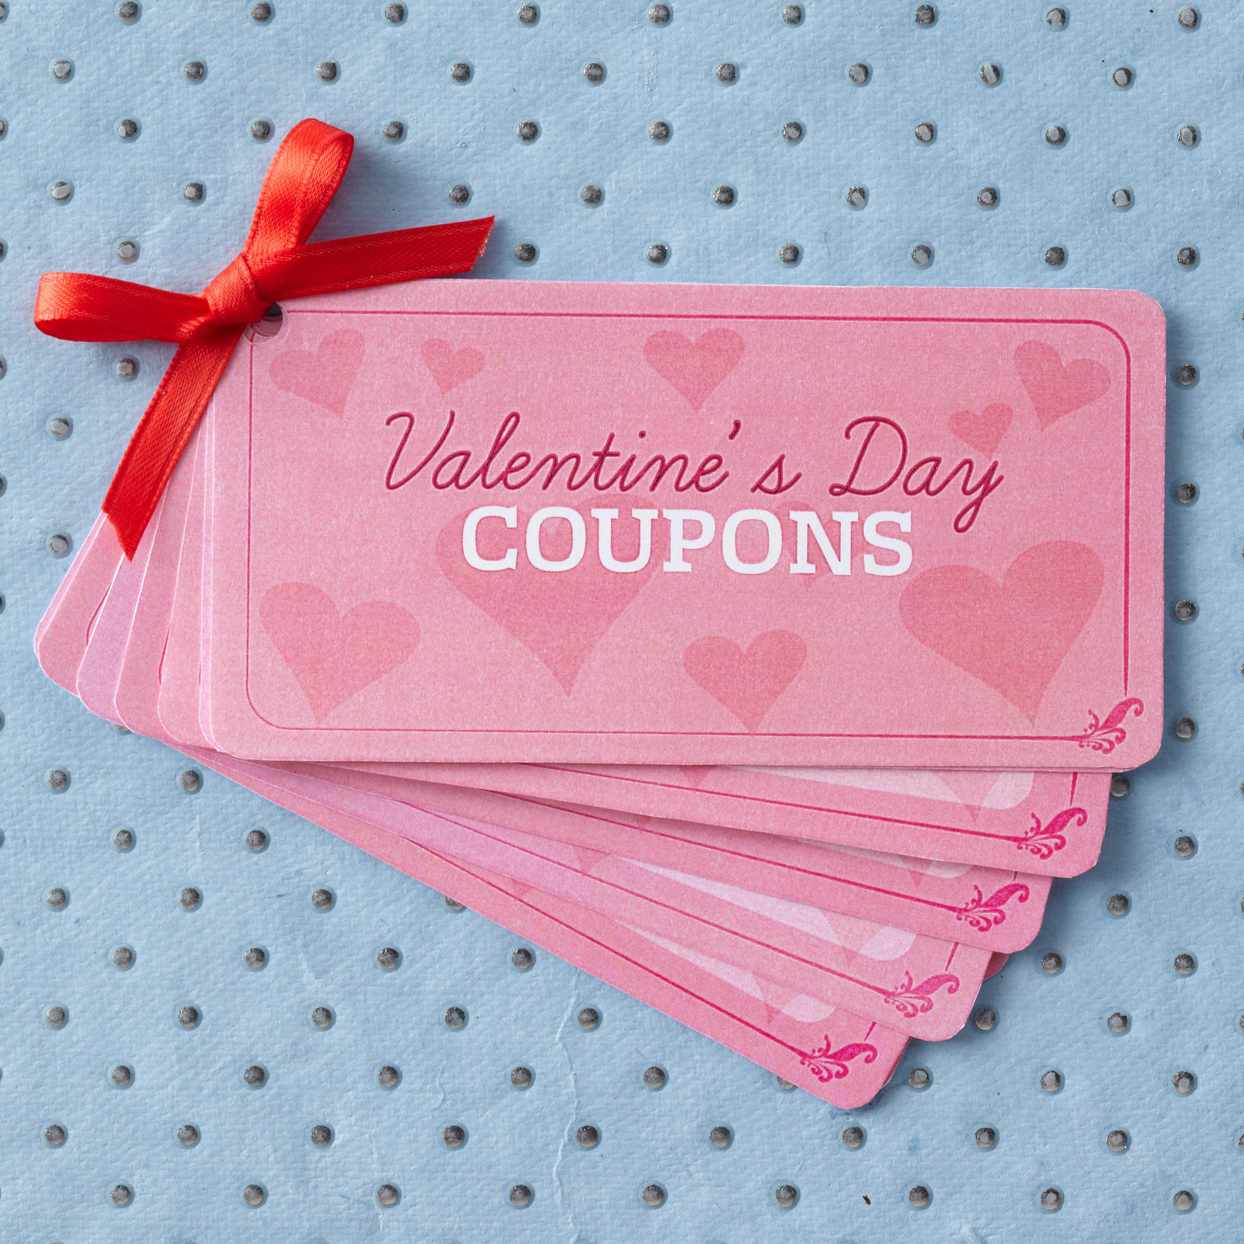 Valentines Day Coupons